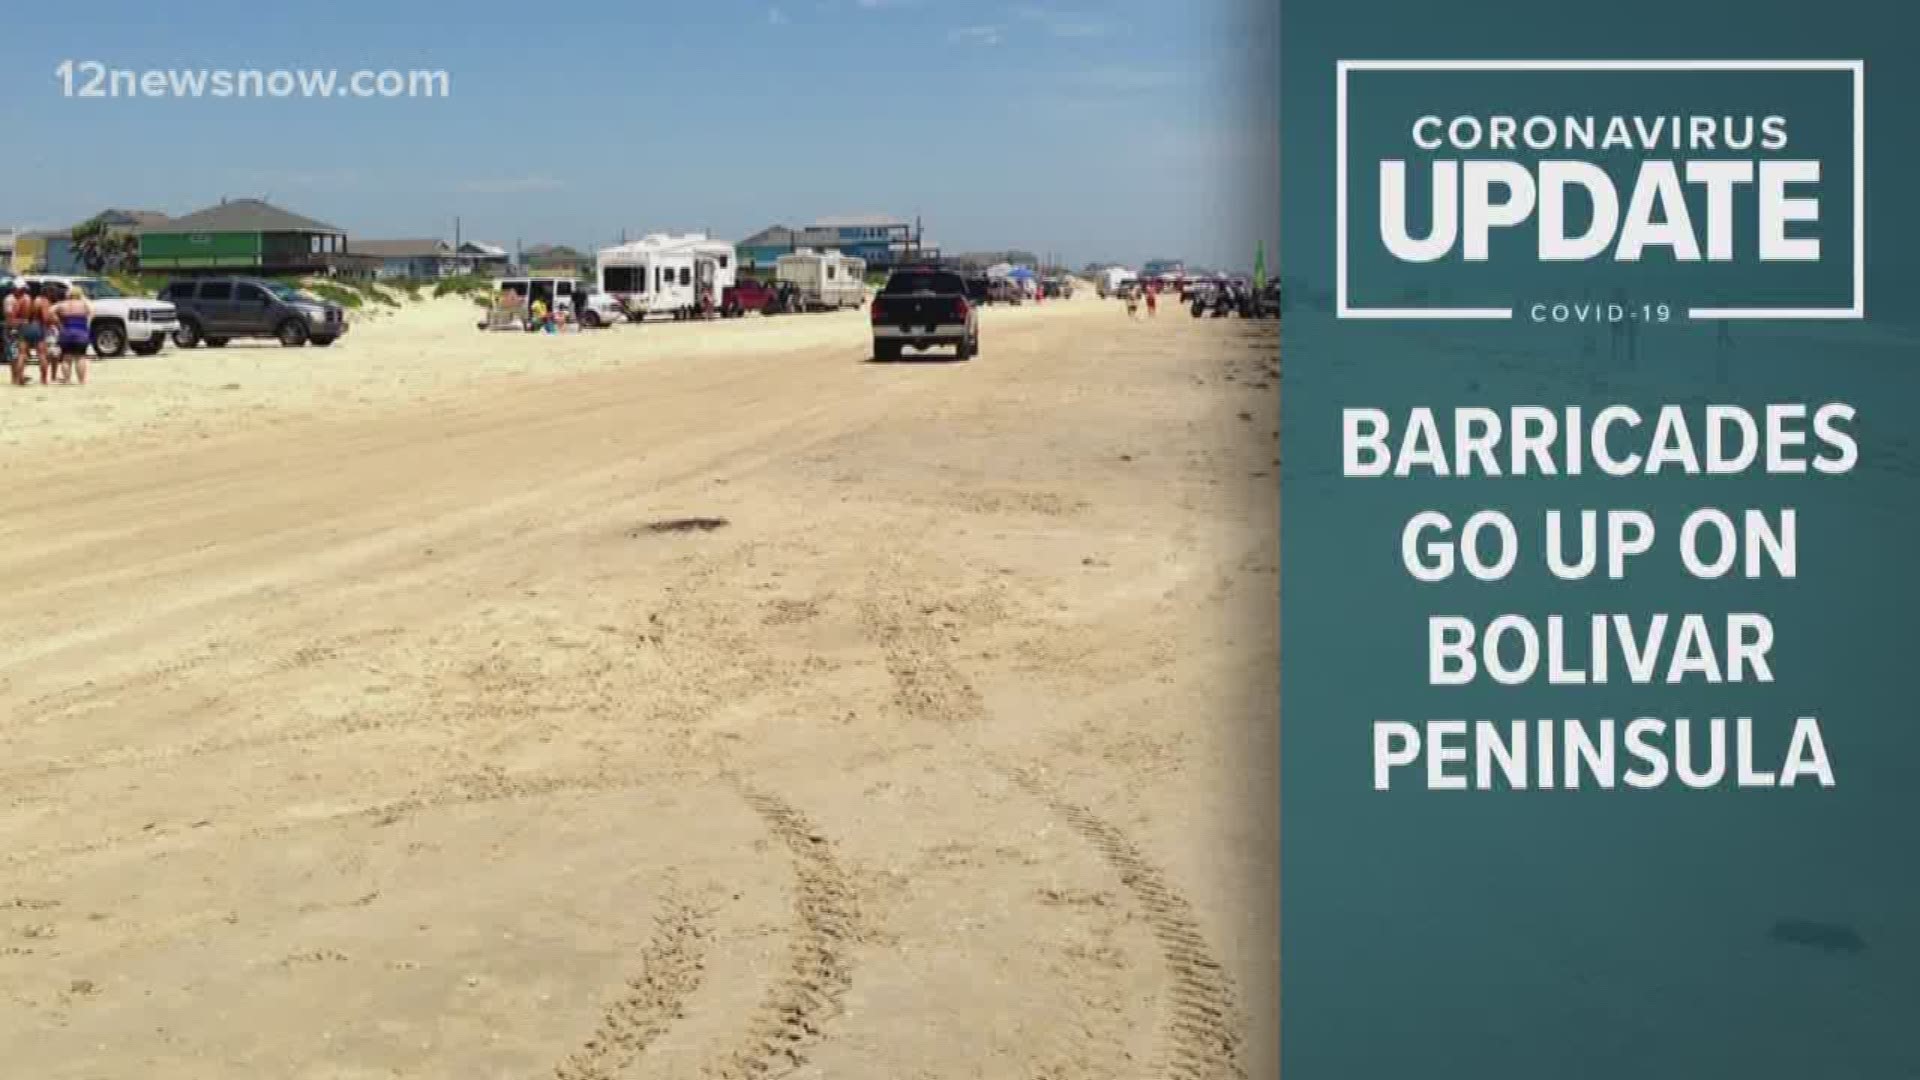 Barricades are going up on Galveston County beaches ahead of Easter weekend